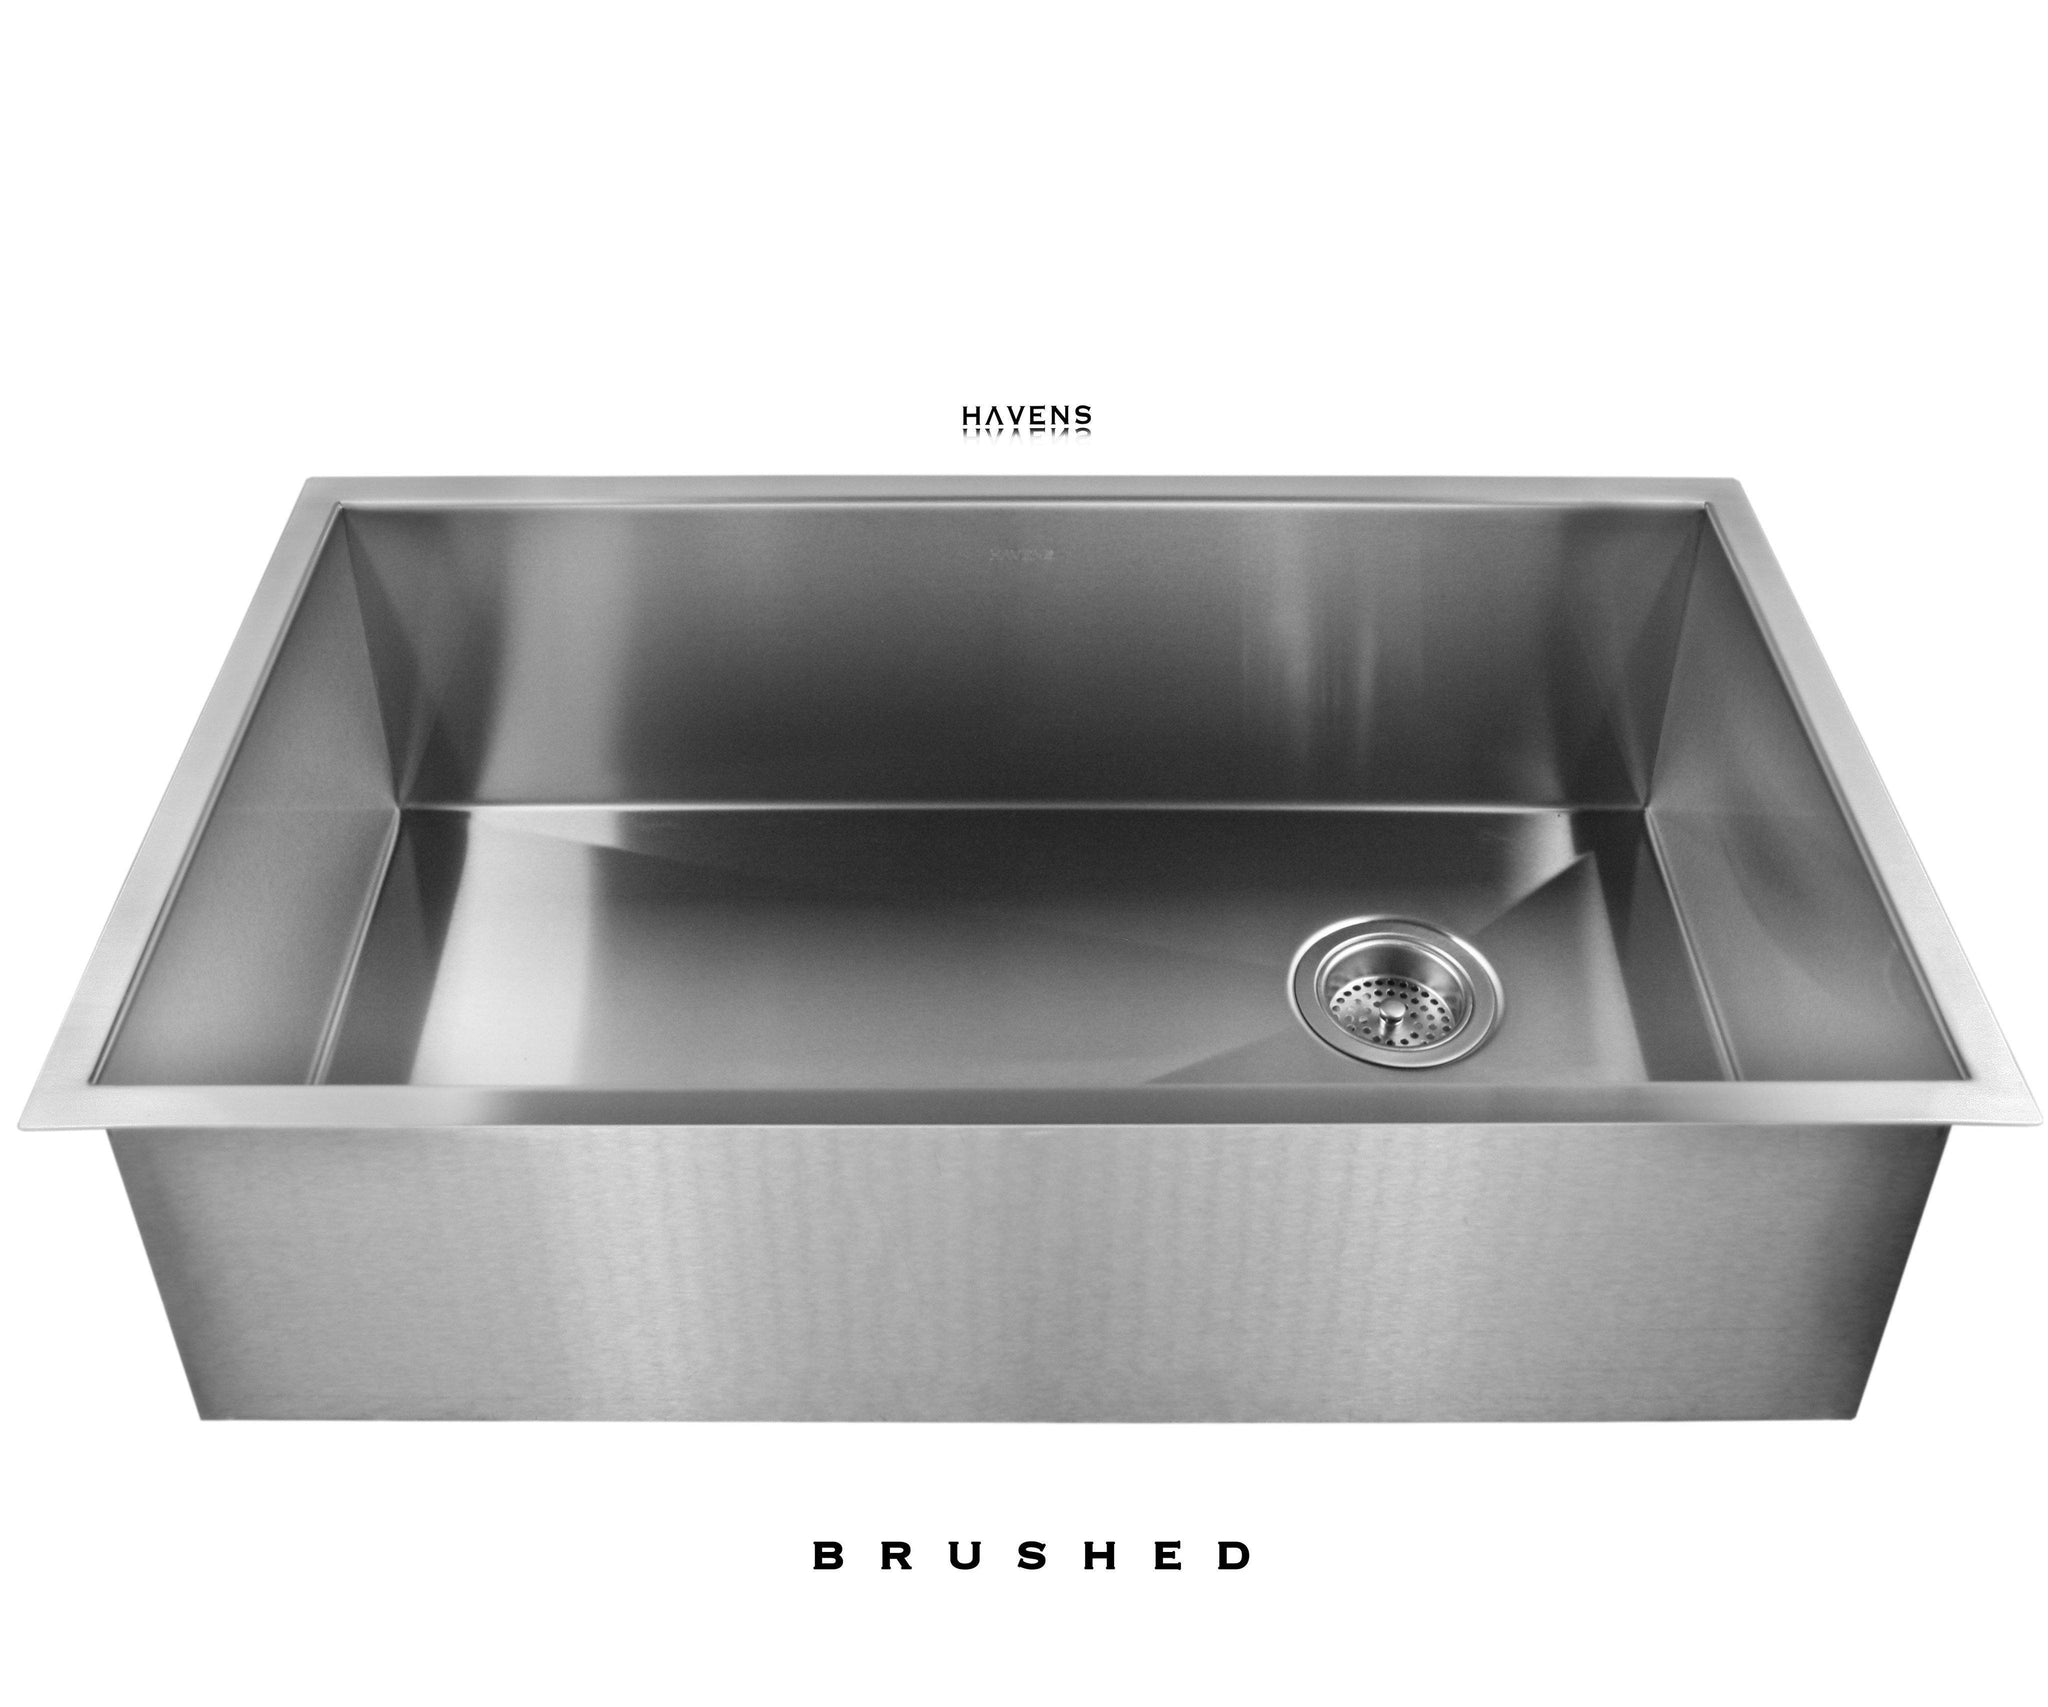 Undermount Stainless Steel Sinks Usa Crafted Havens